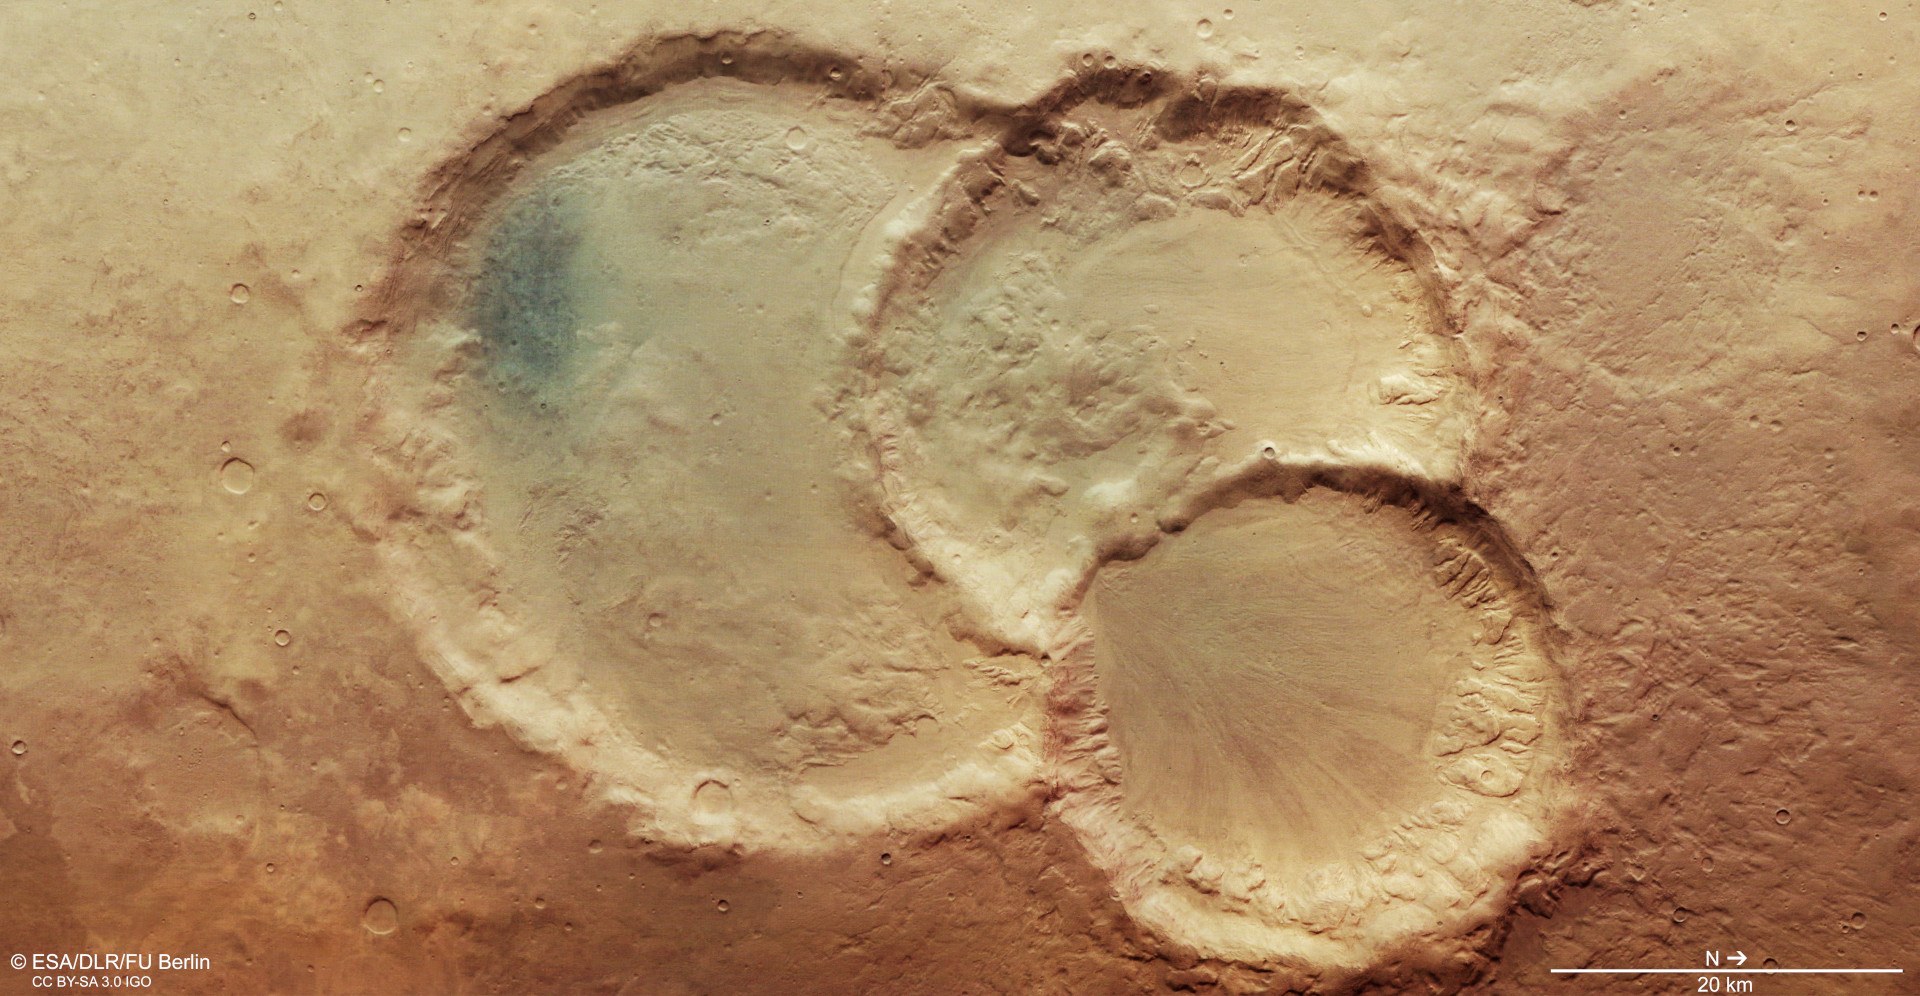 View of a crater triplet in the Noachis Terra region on Mars